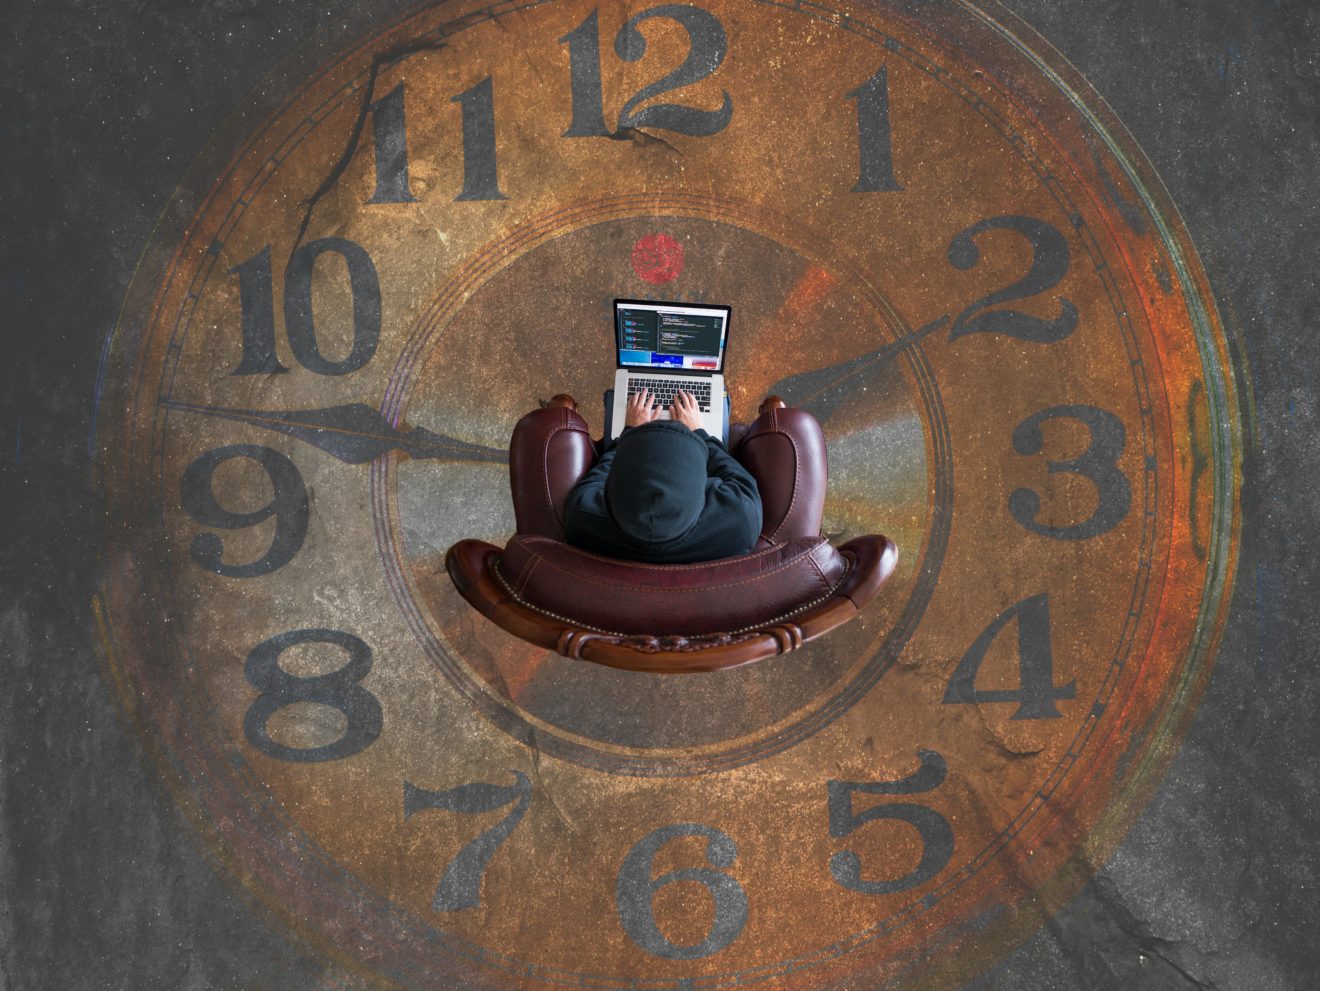 When is wasting time not wasting time?